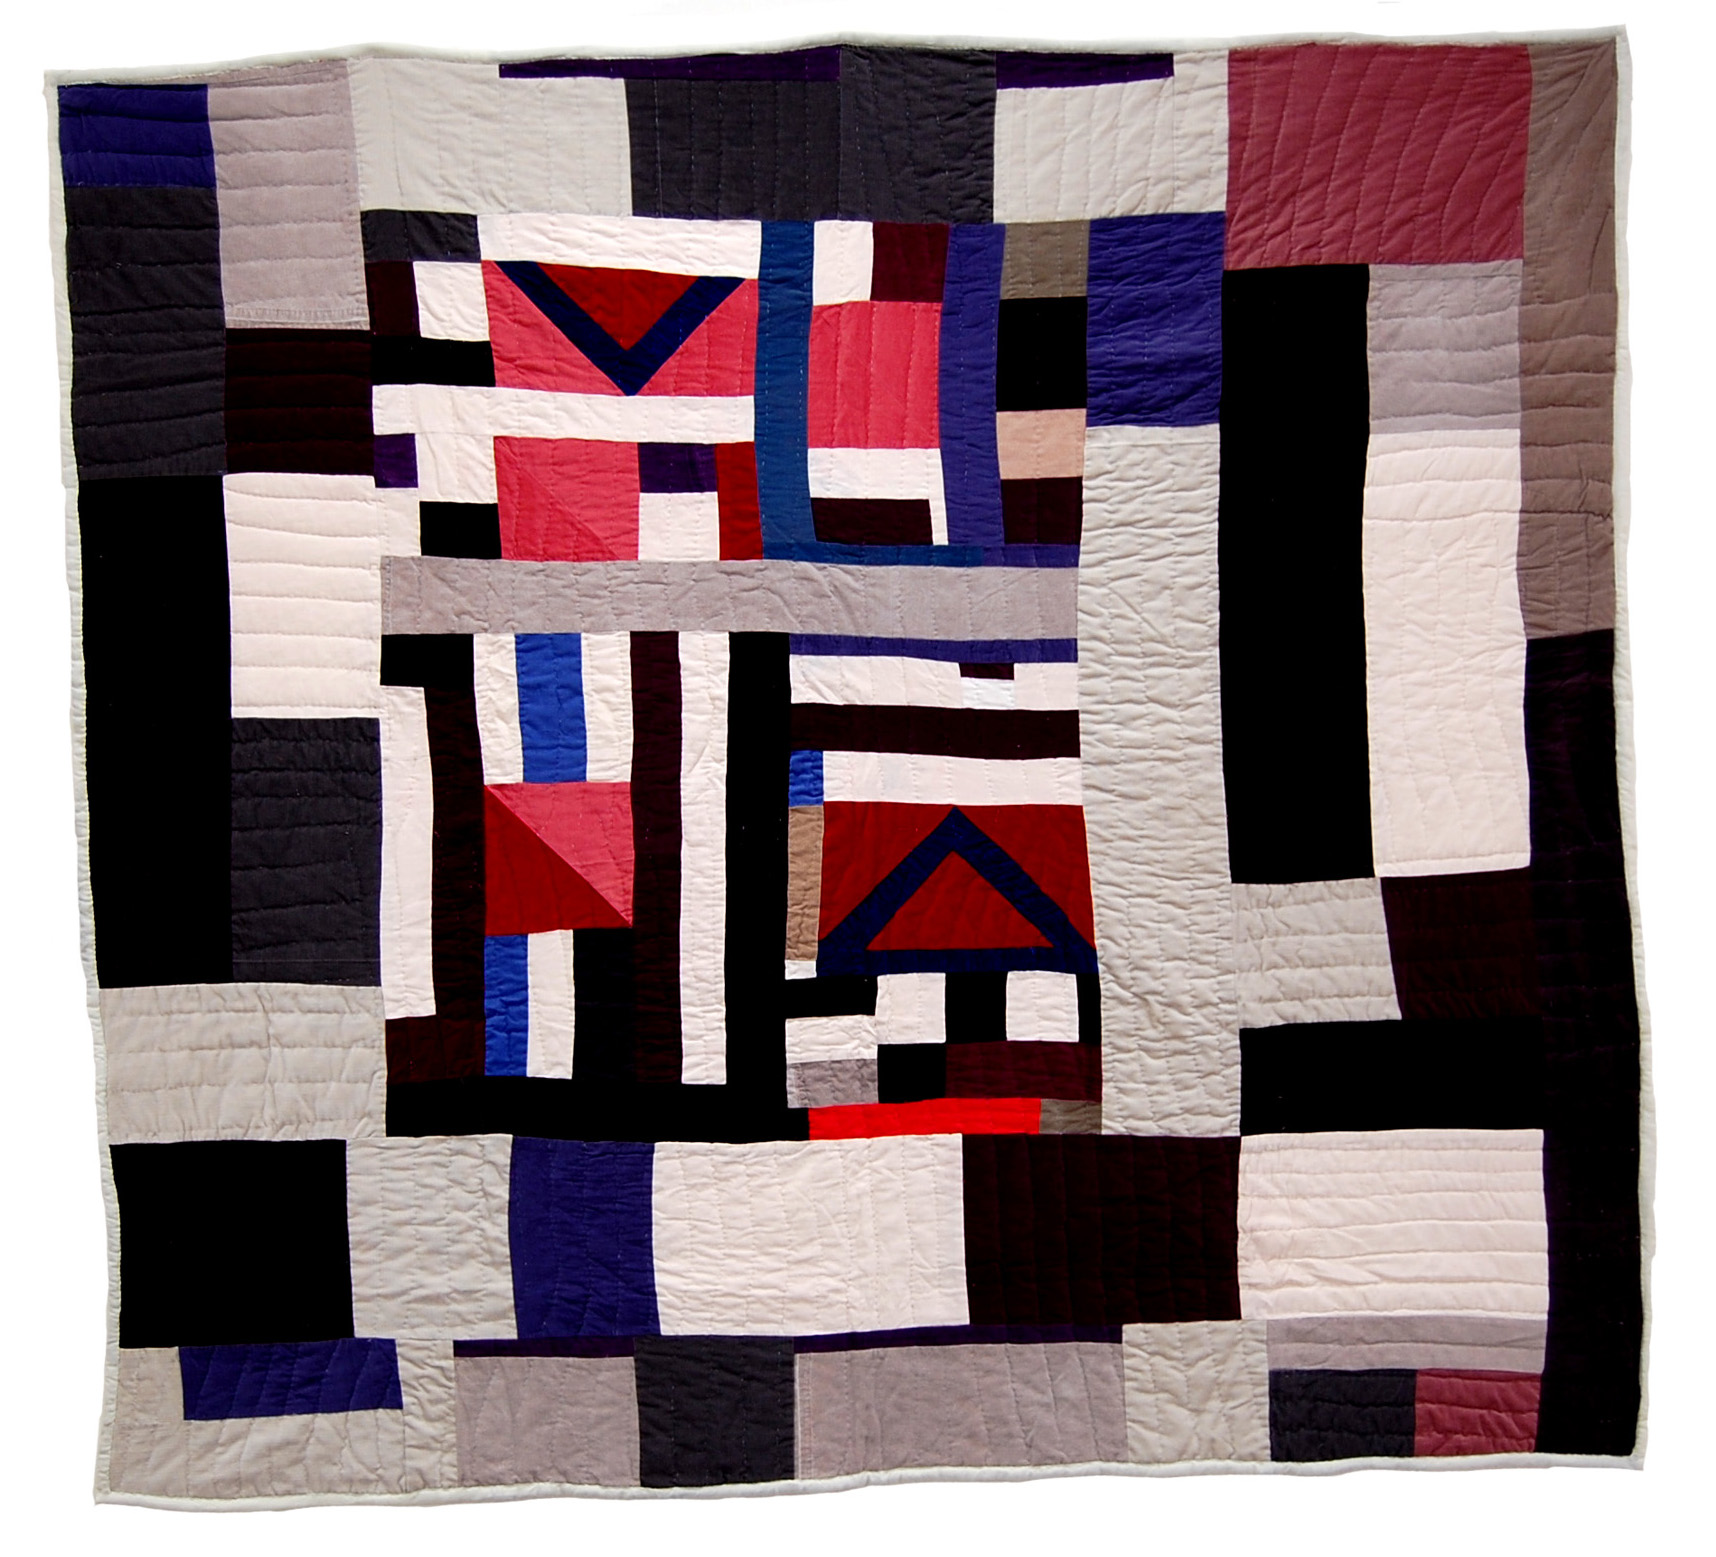   Mary Lee Bendolph   Untitled , 2006 quilted fabric 82 x 76" 